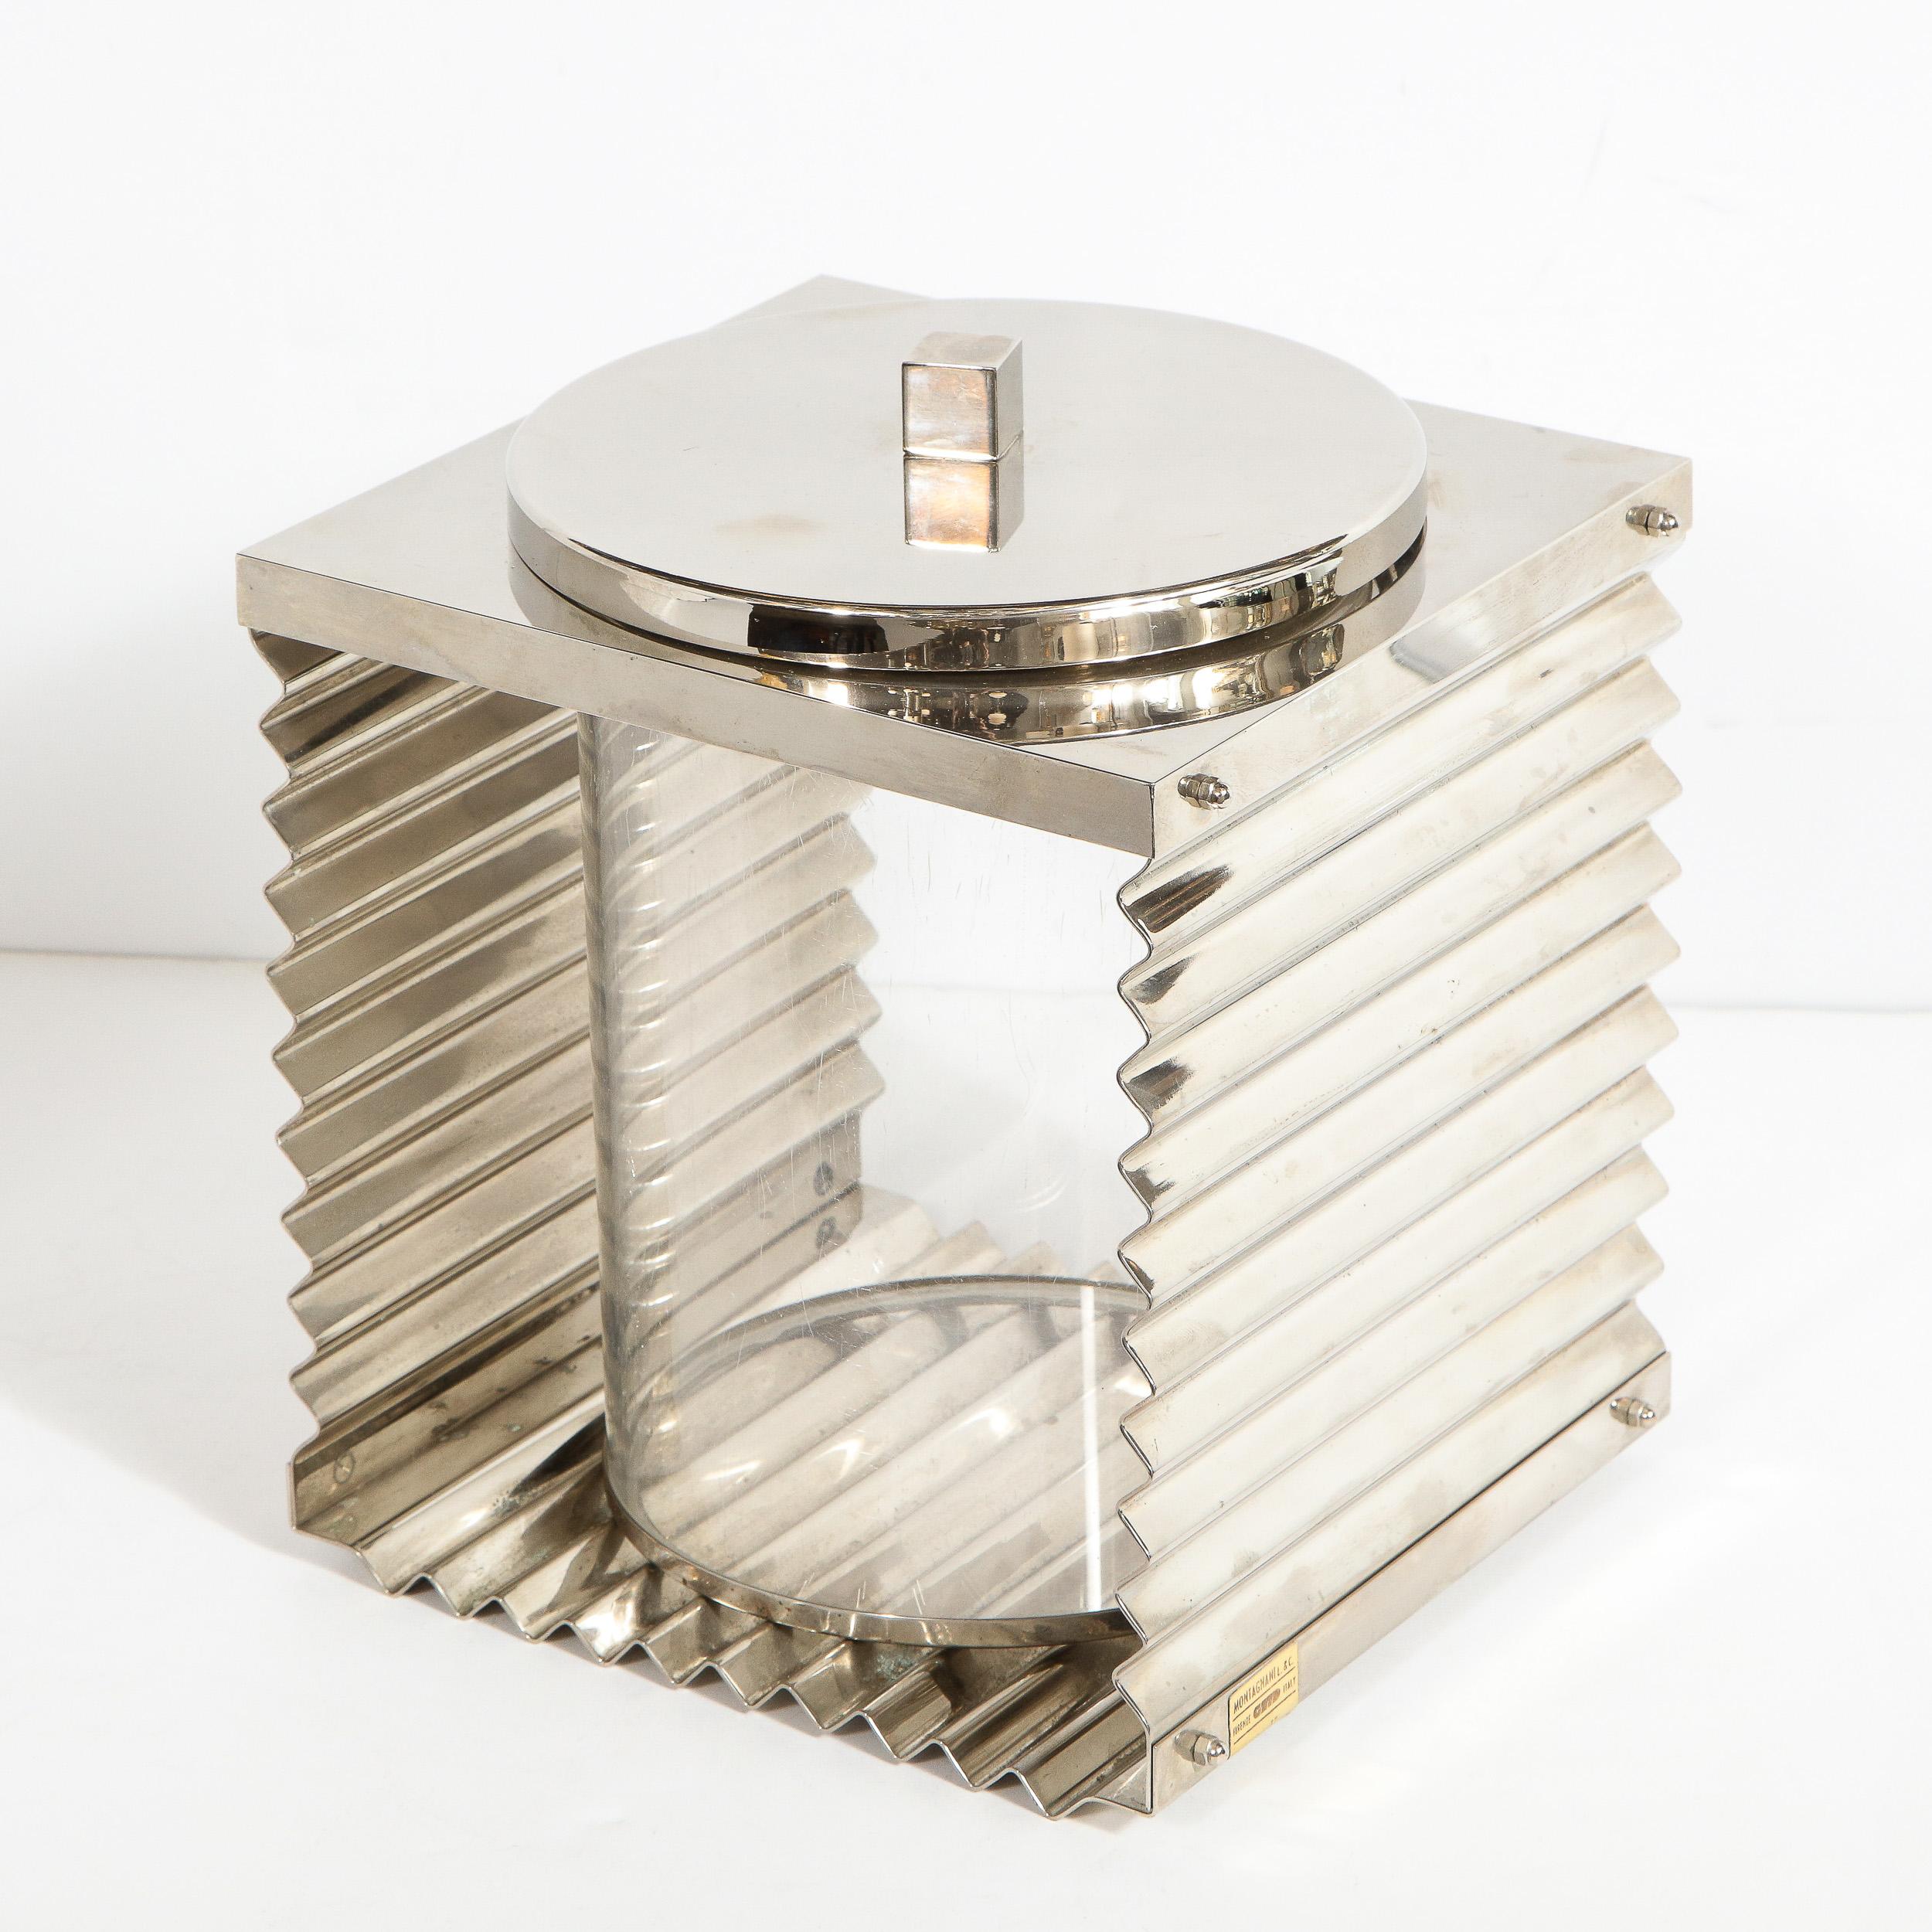 This elegant and graphic Mid-Century Modern ice bucket was realized by the esteemed maker Montagnani, in Florence, Italy, circa 1970. It features a cylindrical Lucite iceholder in the center flanked by sheets of corrugated chrome metal on two sides